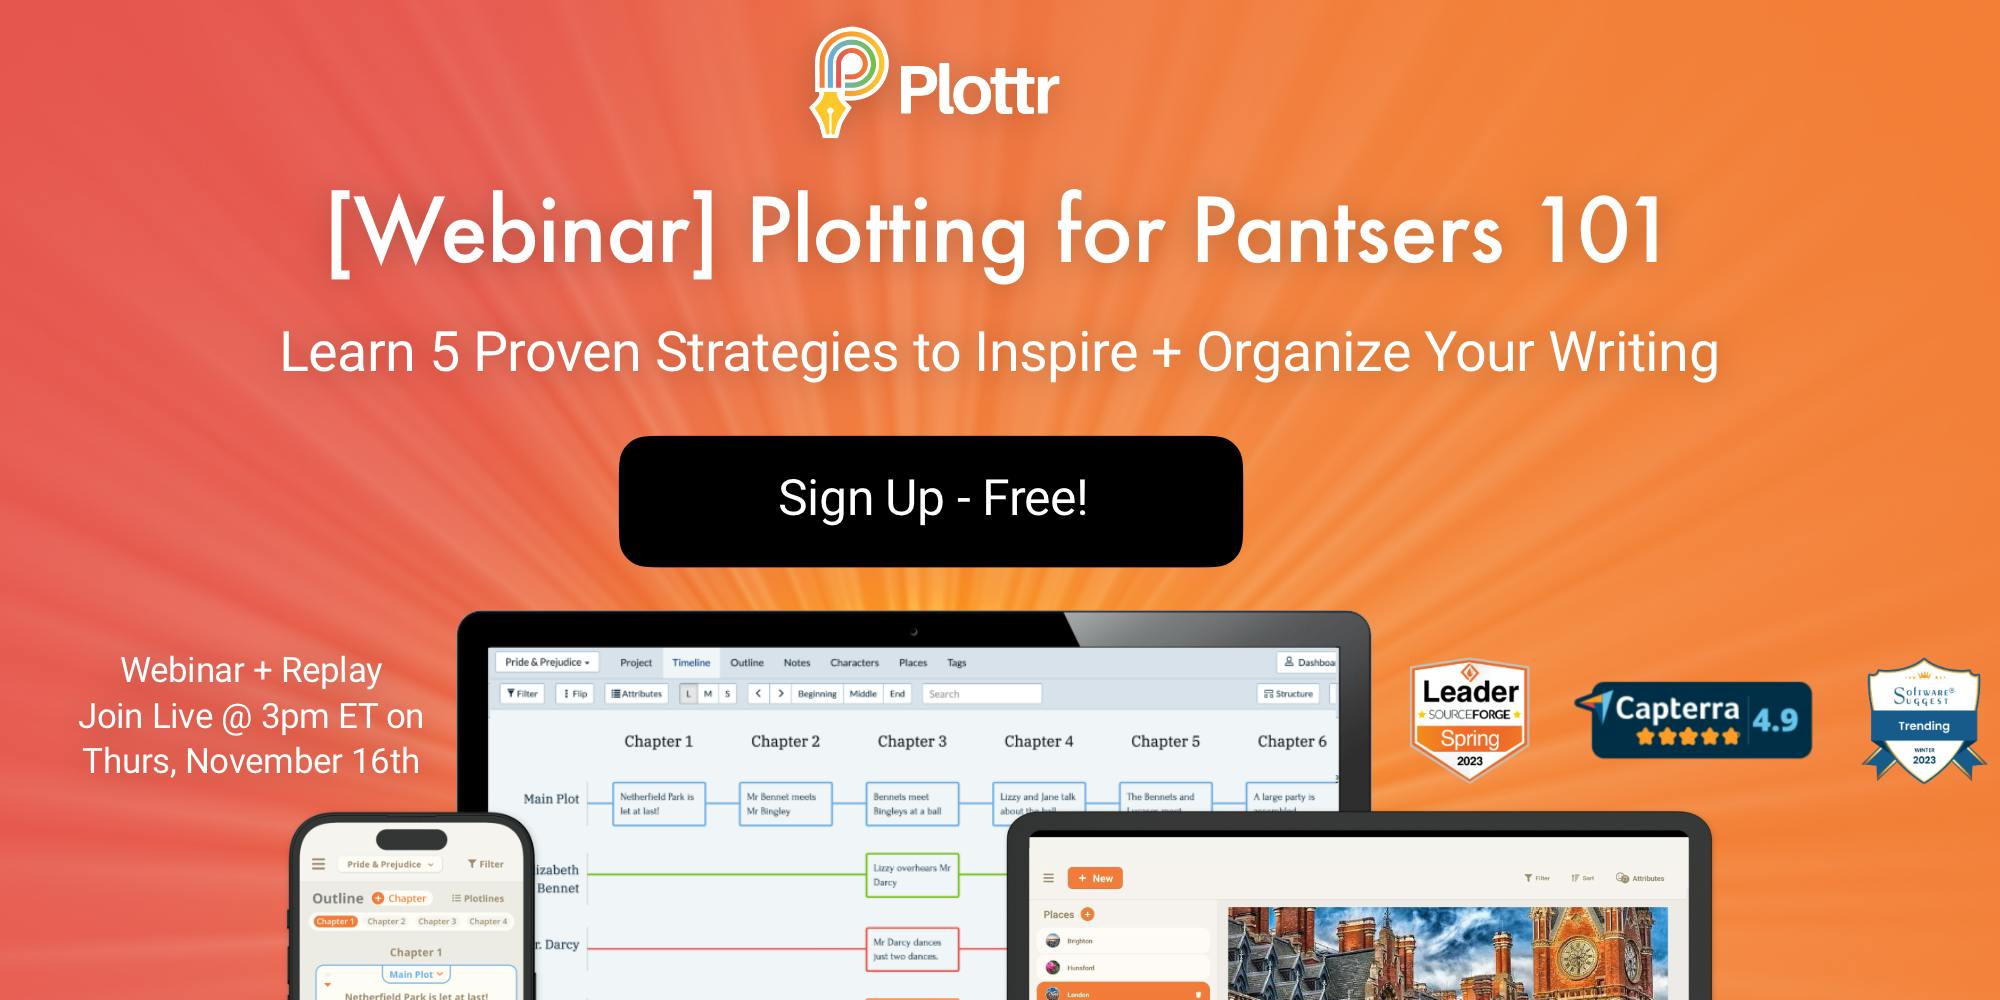 Plottr. [Webinar] Plotting for Pantsers 101. Learn 5 proven strategies to inspire and organize your writing. Sign up - Free! Webinar and replay available. Join live at 3pm Eastern on Thursday, November 16, 2023.